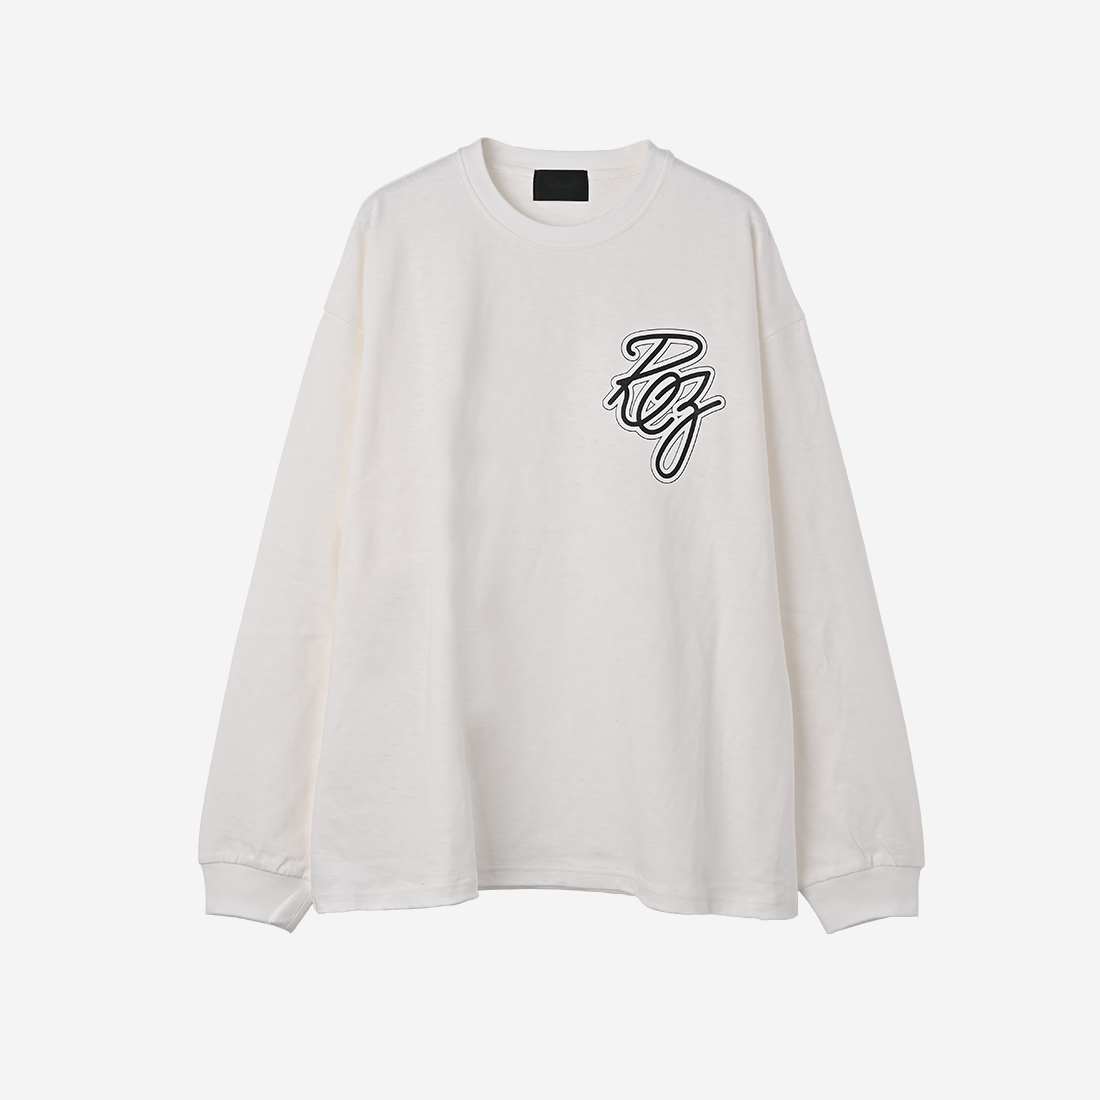 【ReZARD】Thick Layer Printed Long Sleeve T-shirts(White)